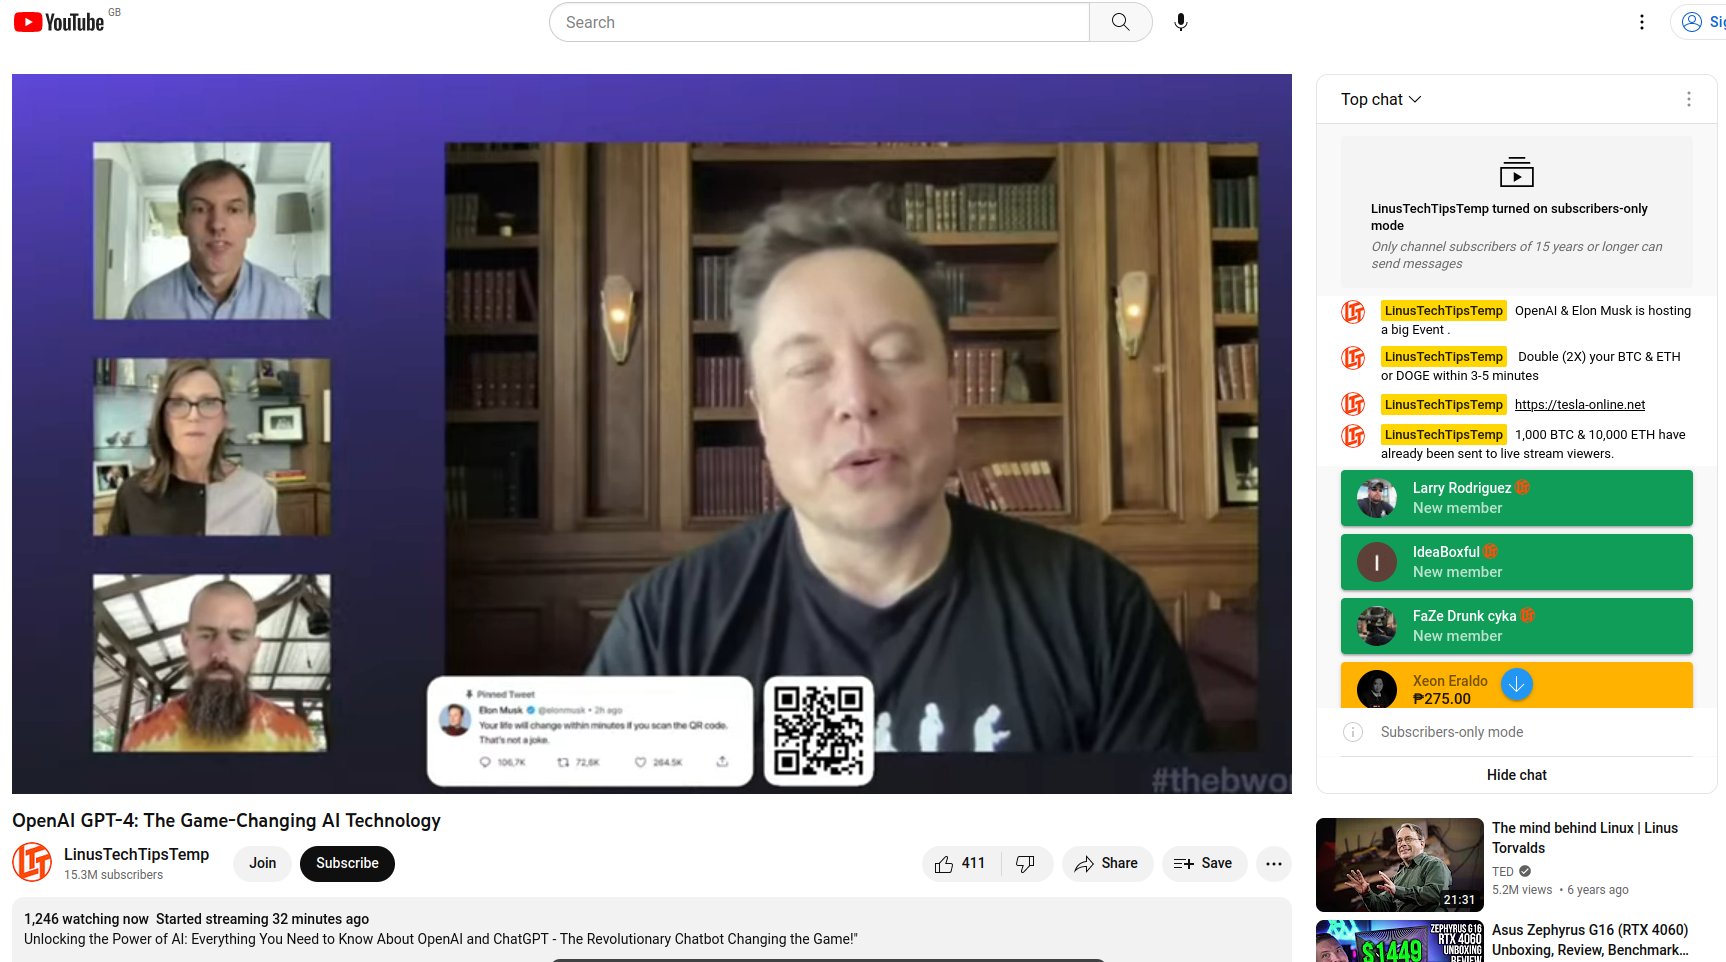 Screenshot while the attack was active showing the scam URL being promoted in the live chat and via QR code. At this point, the channel had been renamed to LinusTechTipsTemp.